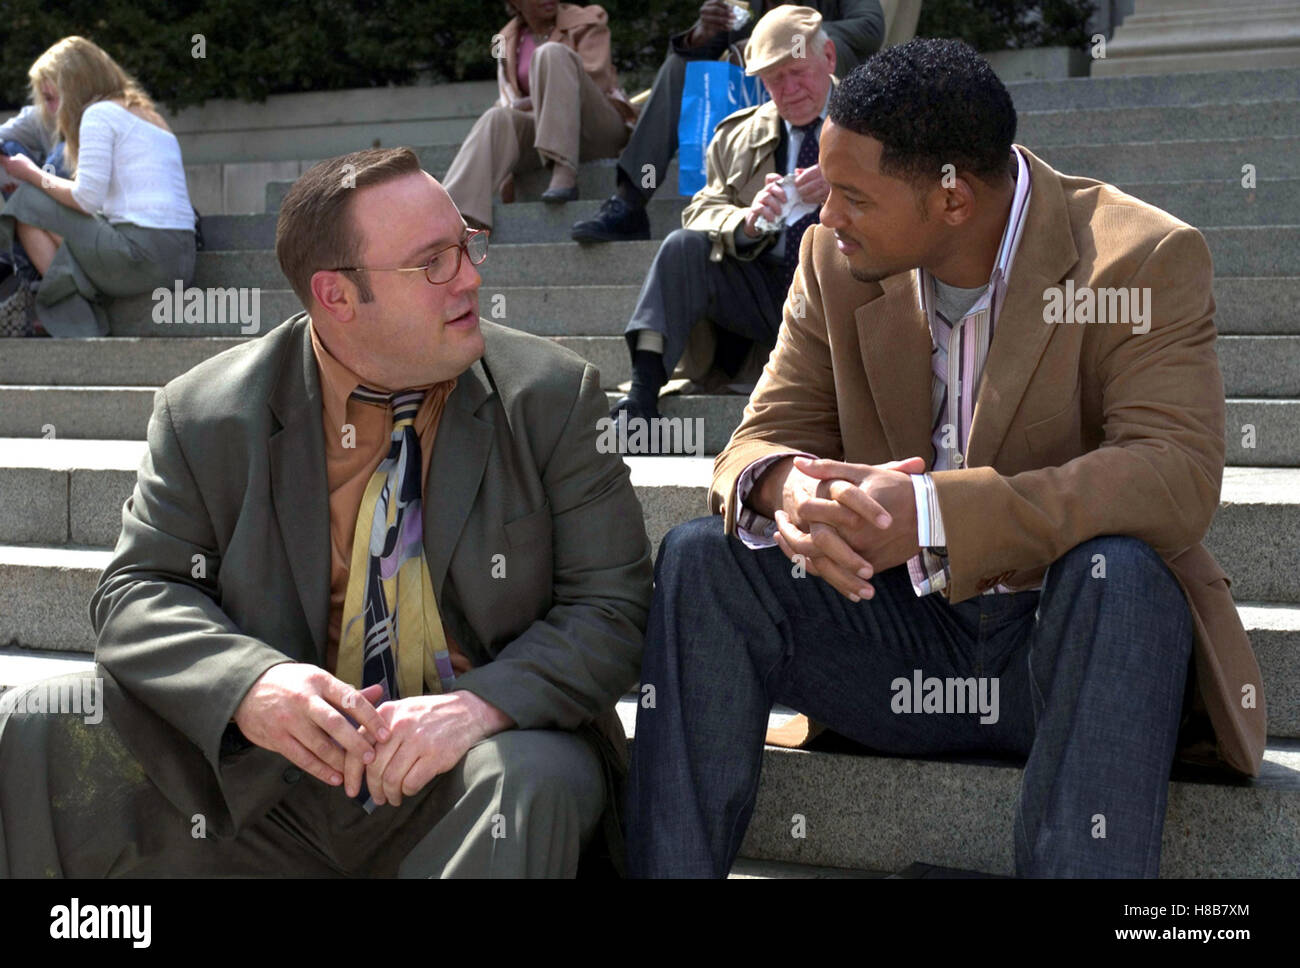 Hitch - Der Date Doktor, (HITCH) USA 2005, Regie: Andy Tennant, KEVIN JAMES, WILL SMITH, Key: Treppe Stock Photo